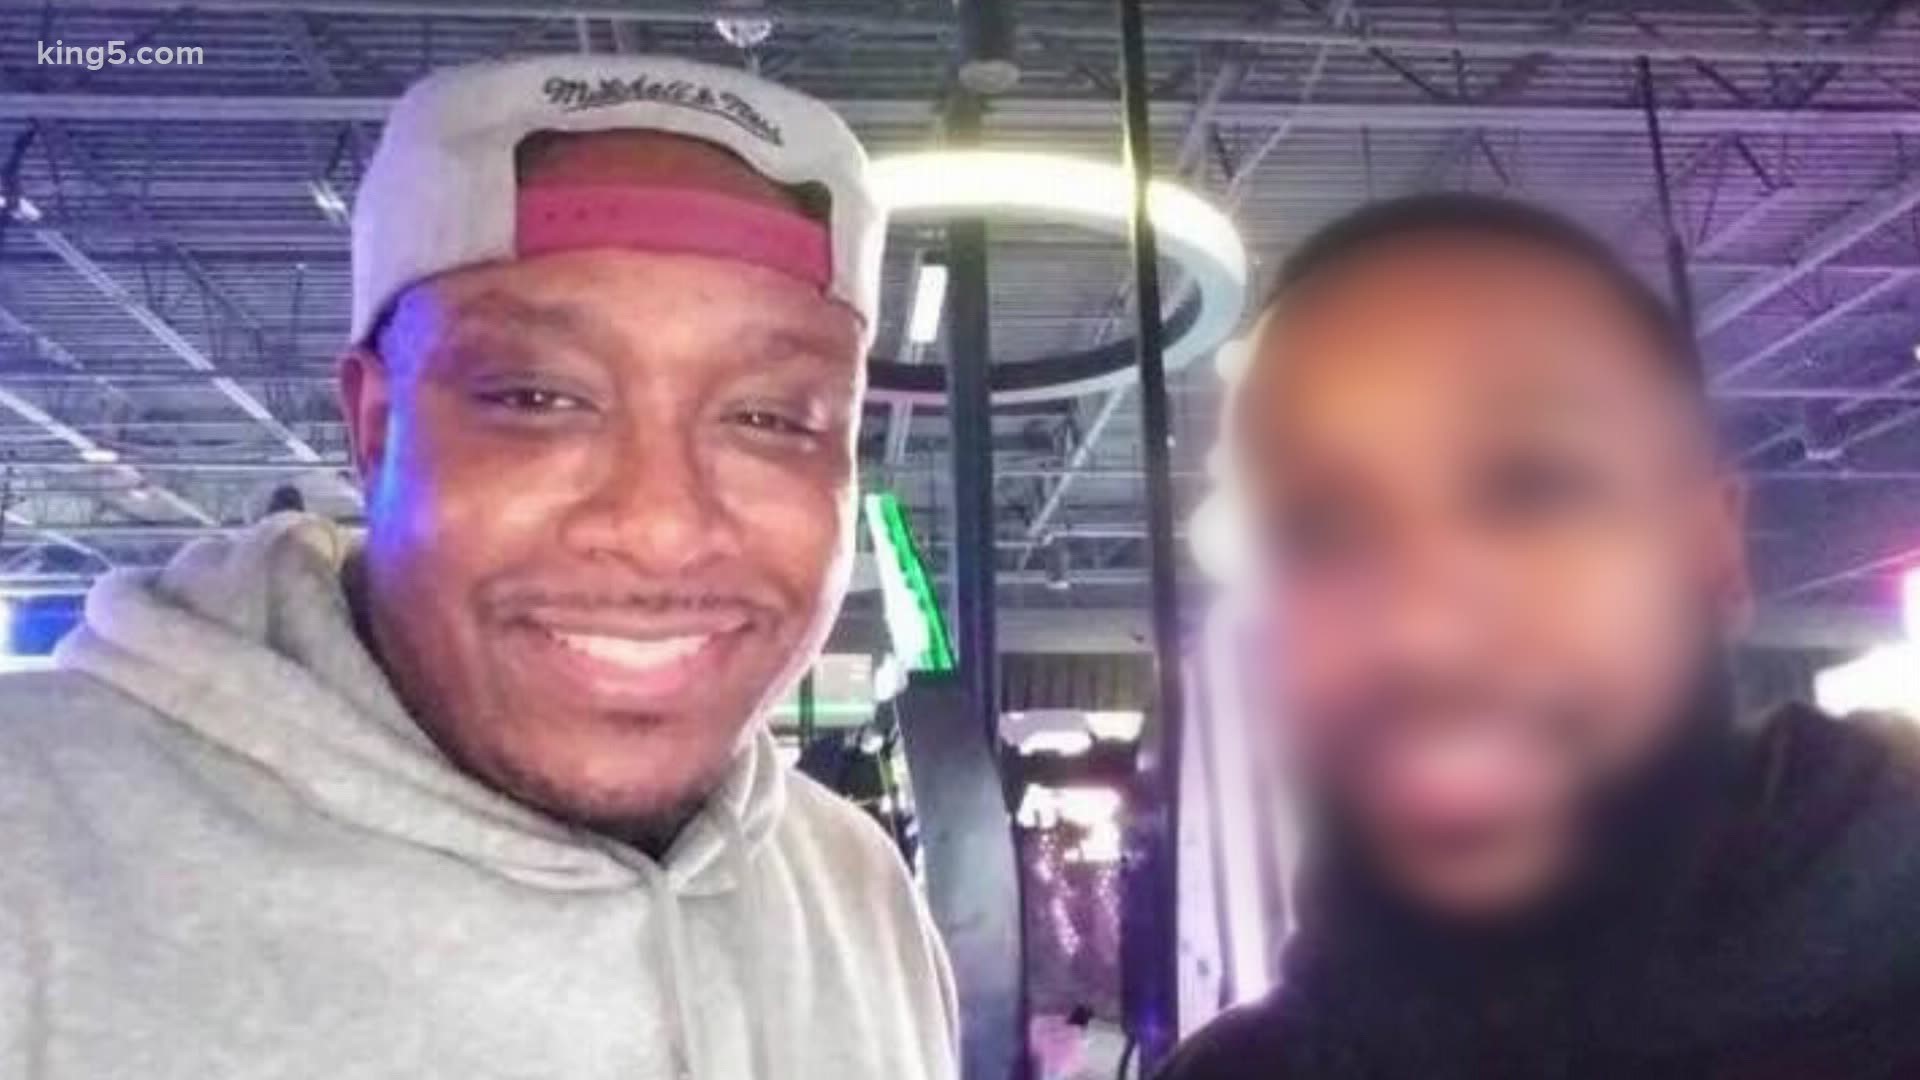 The Tacoma mayor and council also agreed with Manuel Ellis' family that the state should oversee the investigation into the death of the man killed by Tacoma police.